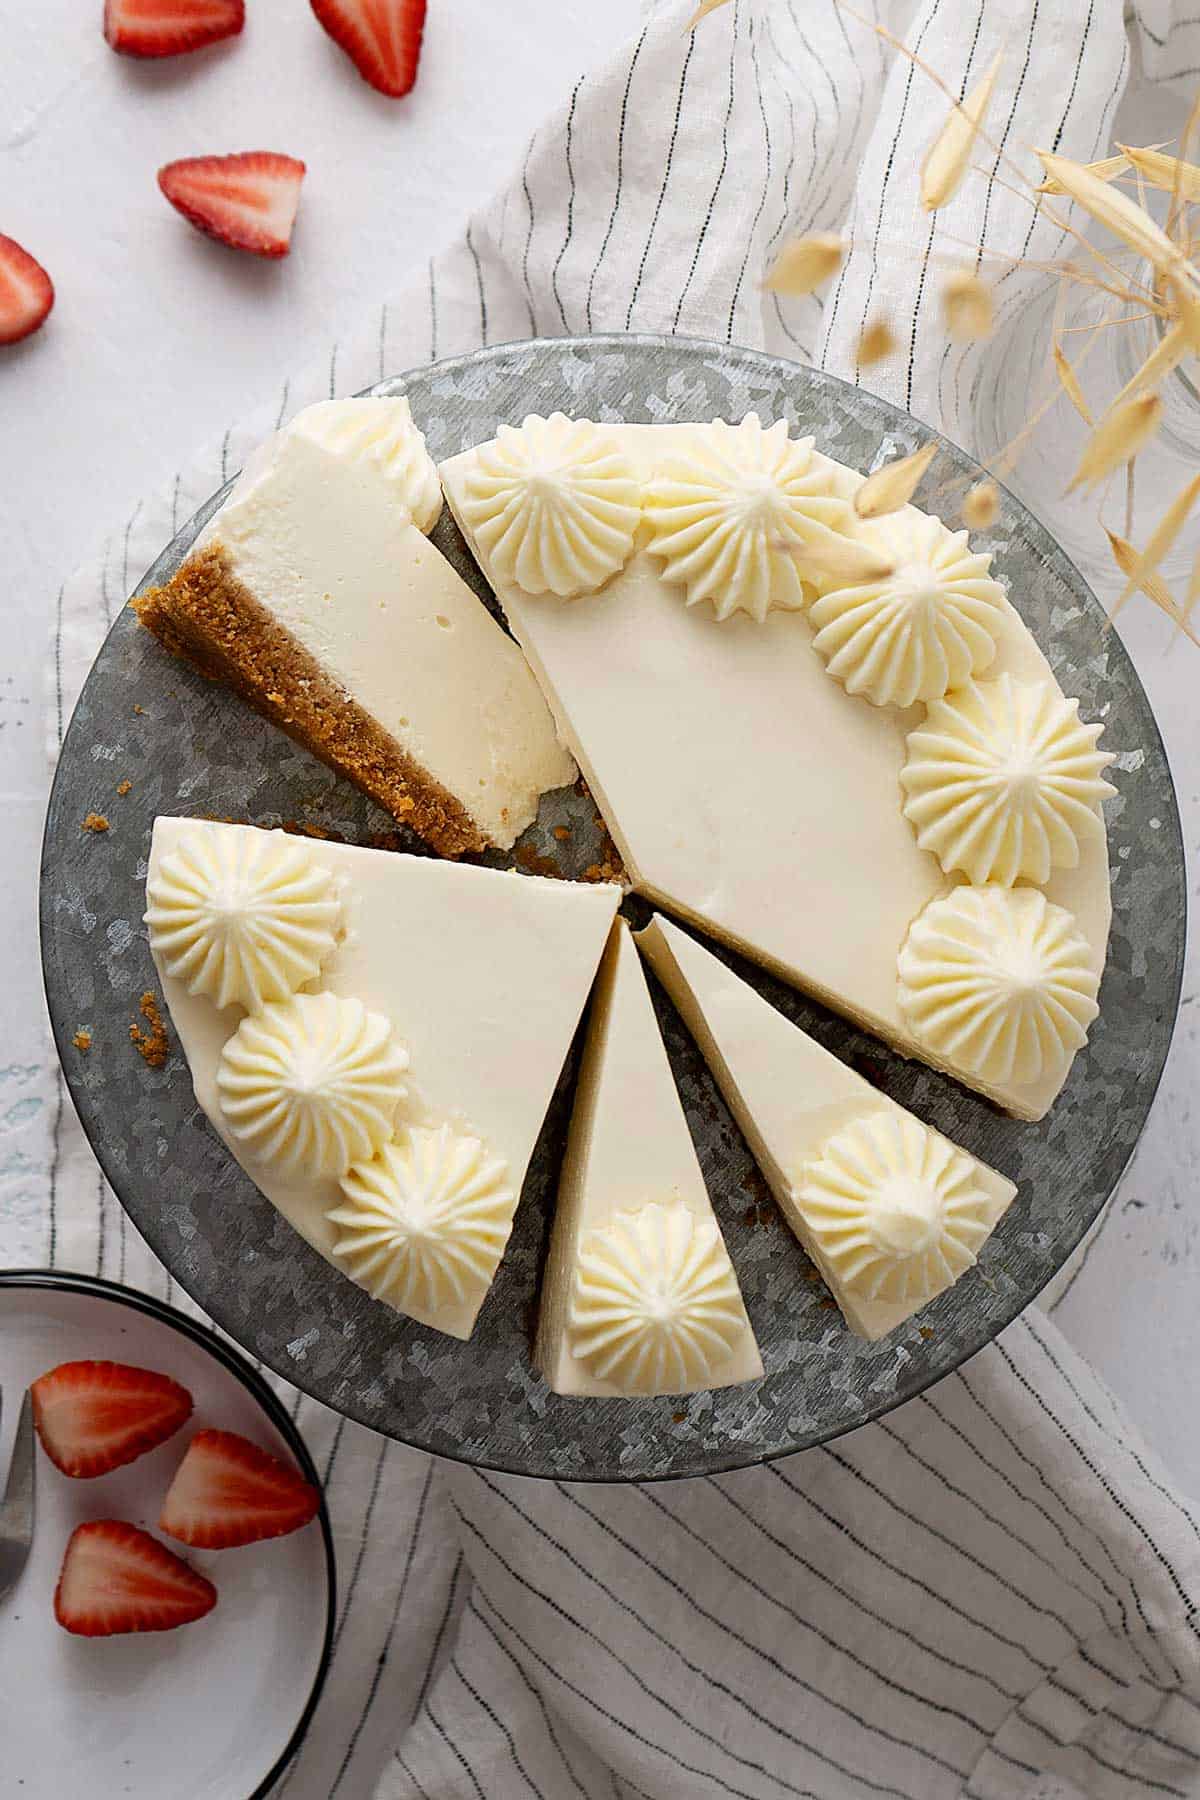 Guide to Adjusting Cheesecake Sizes - Life Love and Sugar